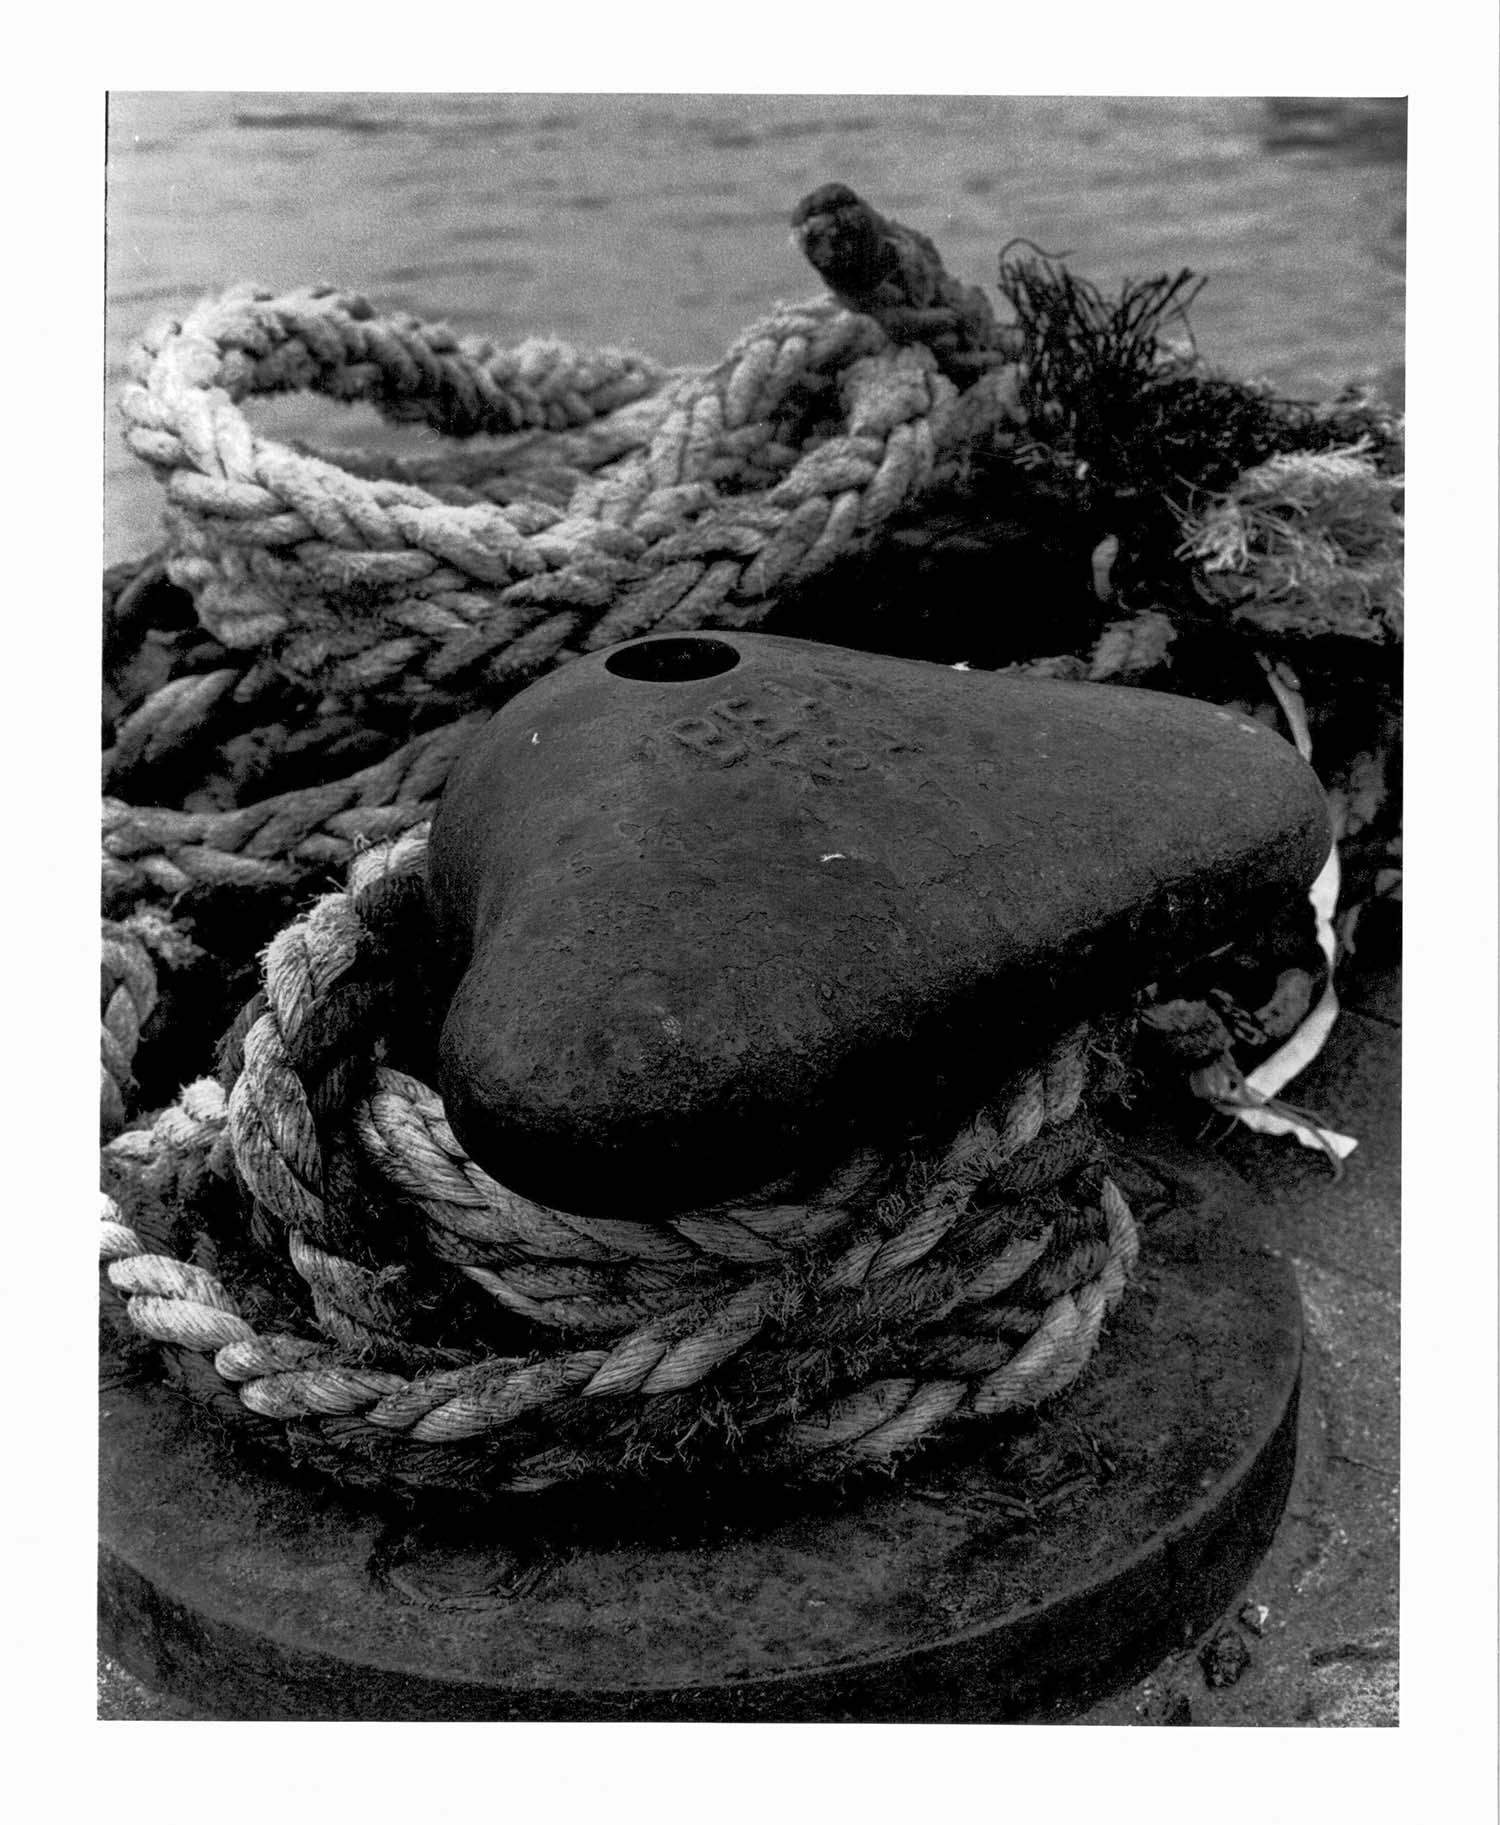 ropes in marina in poole uk, black and white art photography, black and white art photography prints, black and white art photography for sale, black and white art photography prints for sale, black and white photo prints uk, black and white wall art, black and white photo for wall, black and white framed prints for living room, black and white photo prints, black and white photo prints uk, Black and White Photography Art Prints for Sale,